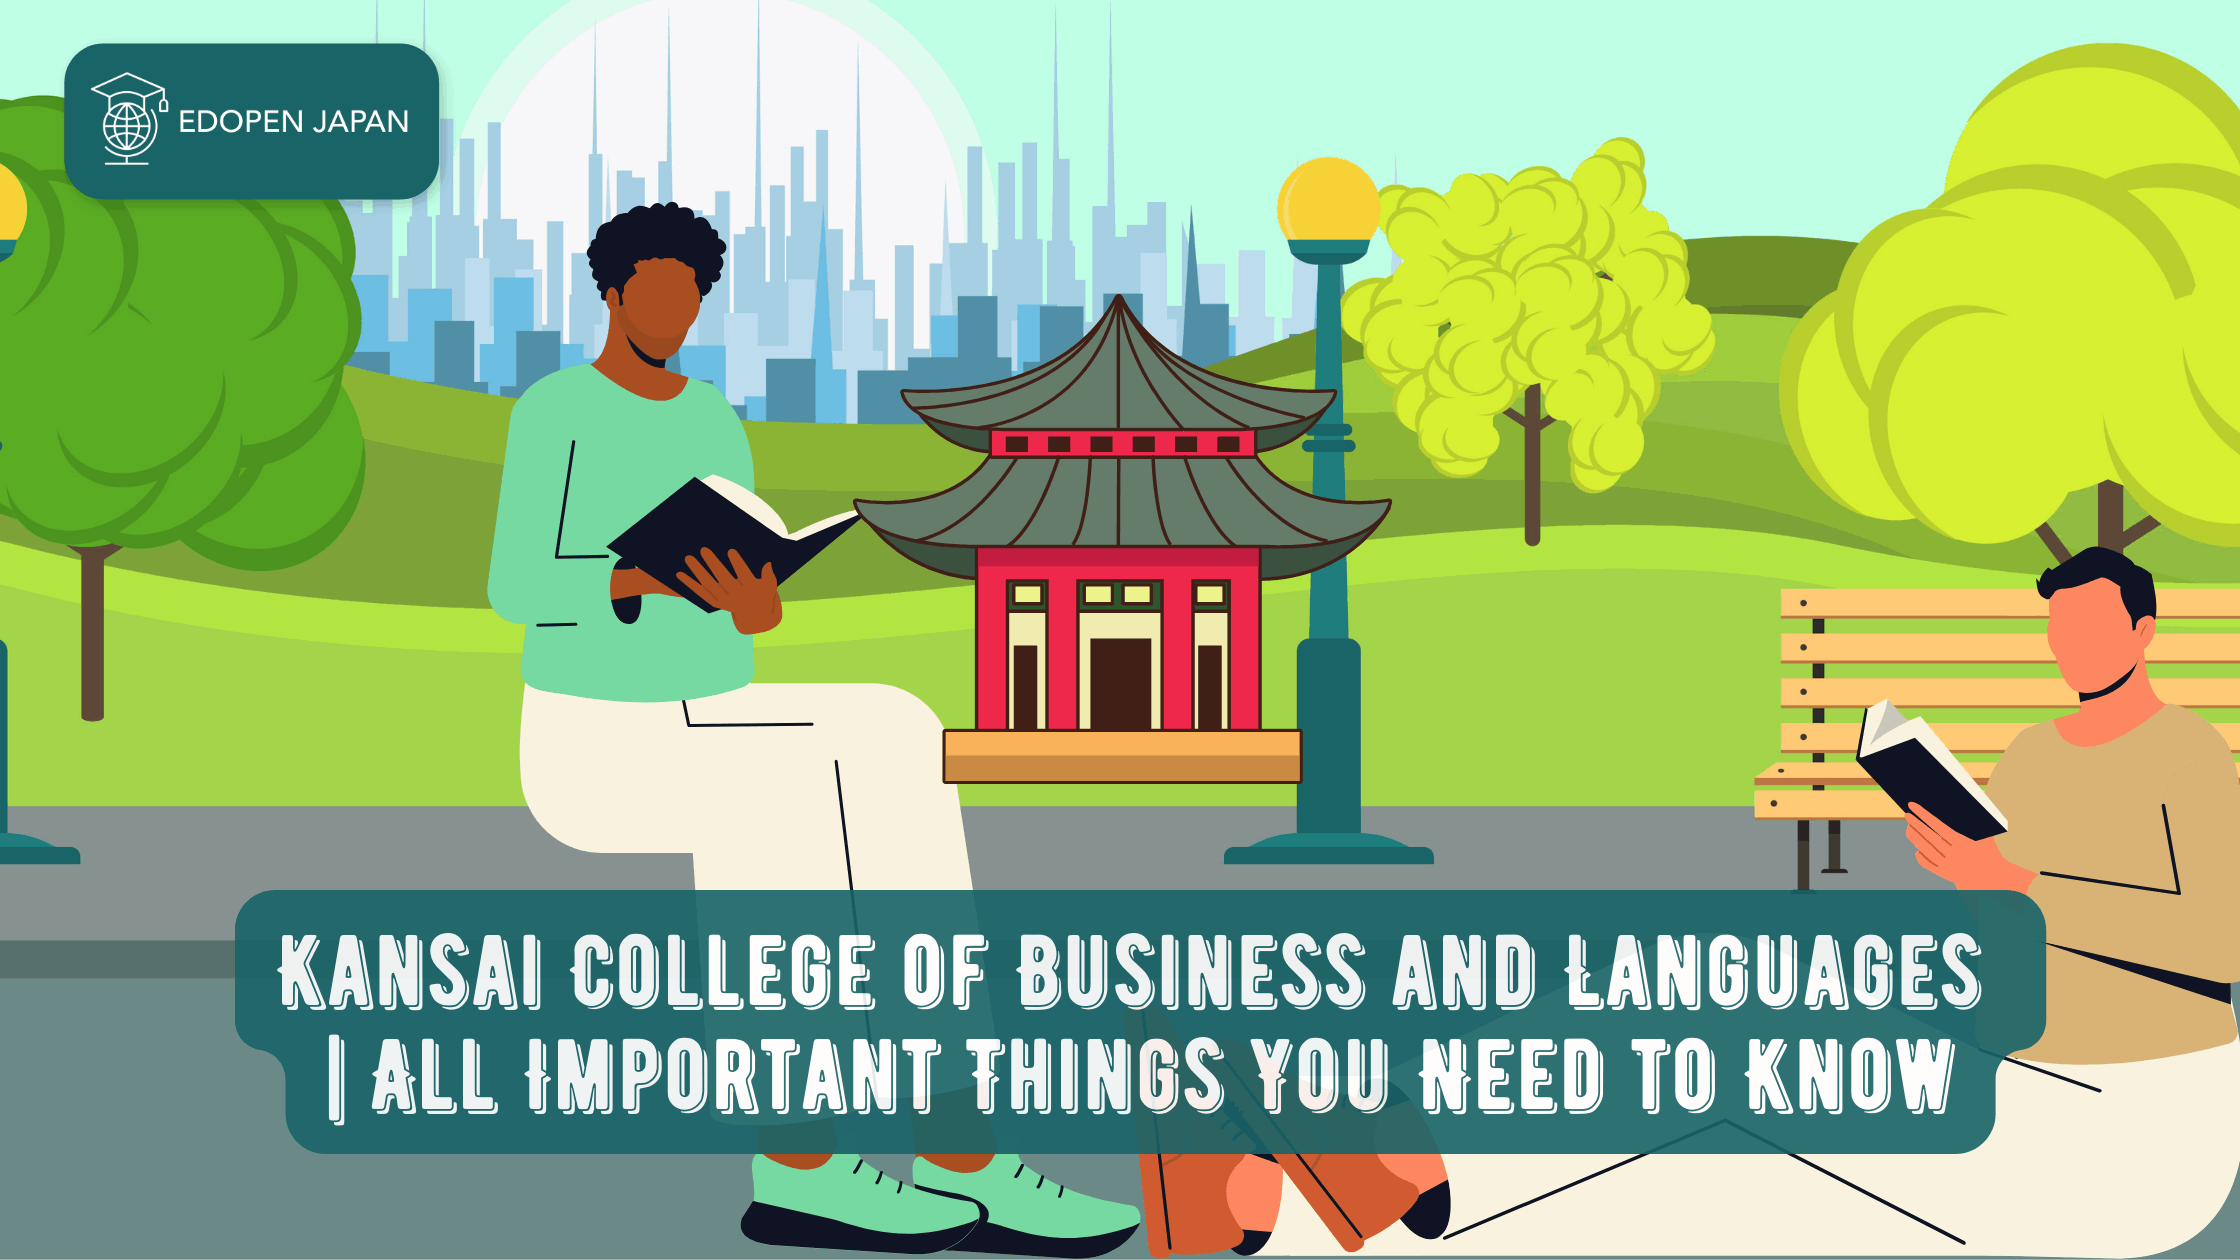 Kansai College of Business and Languages | All Important Things You Need to Know - EDOPEN Japan